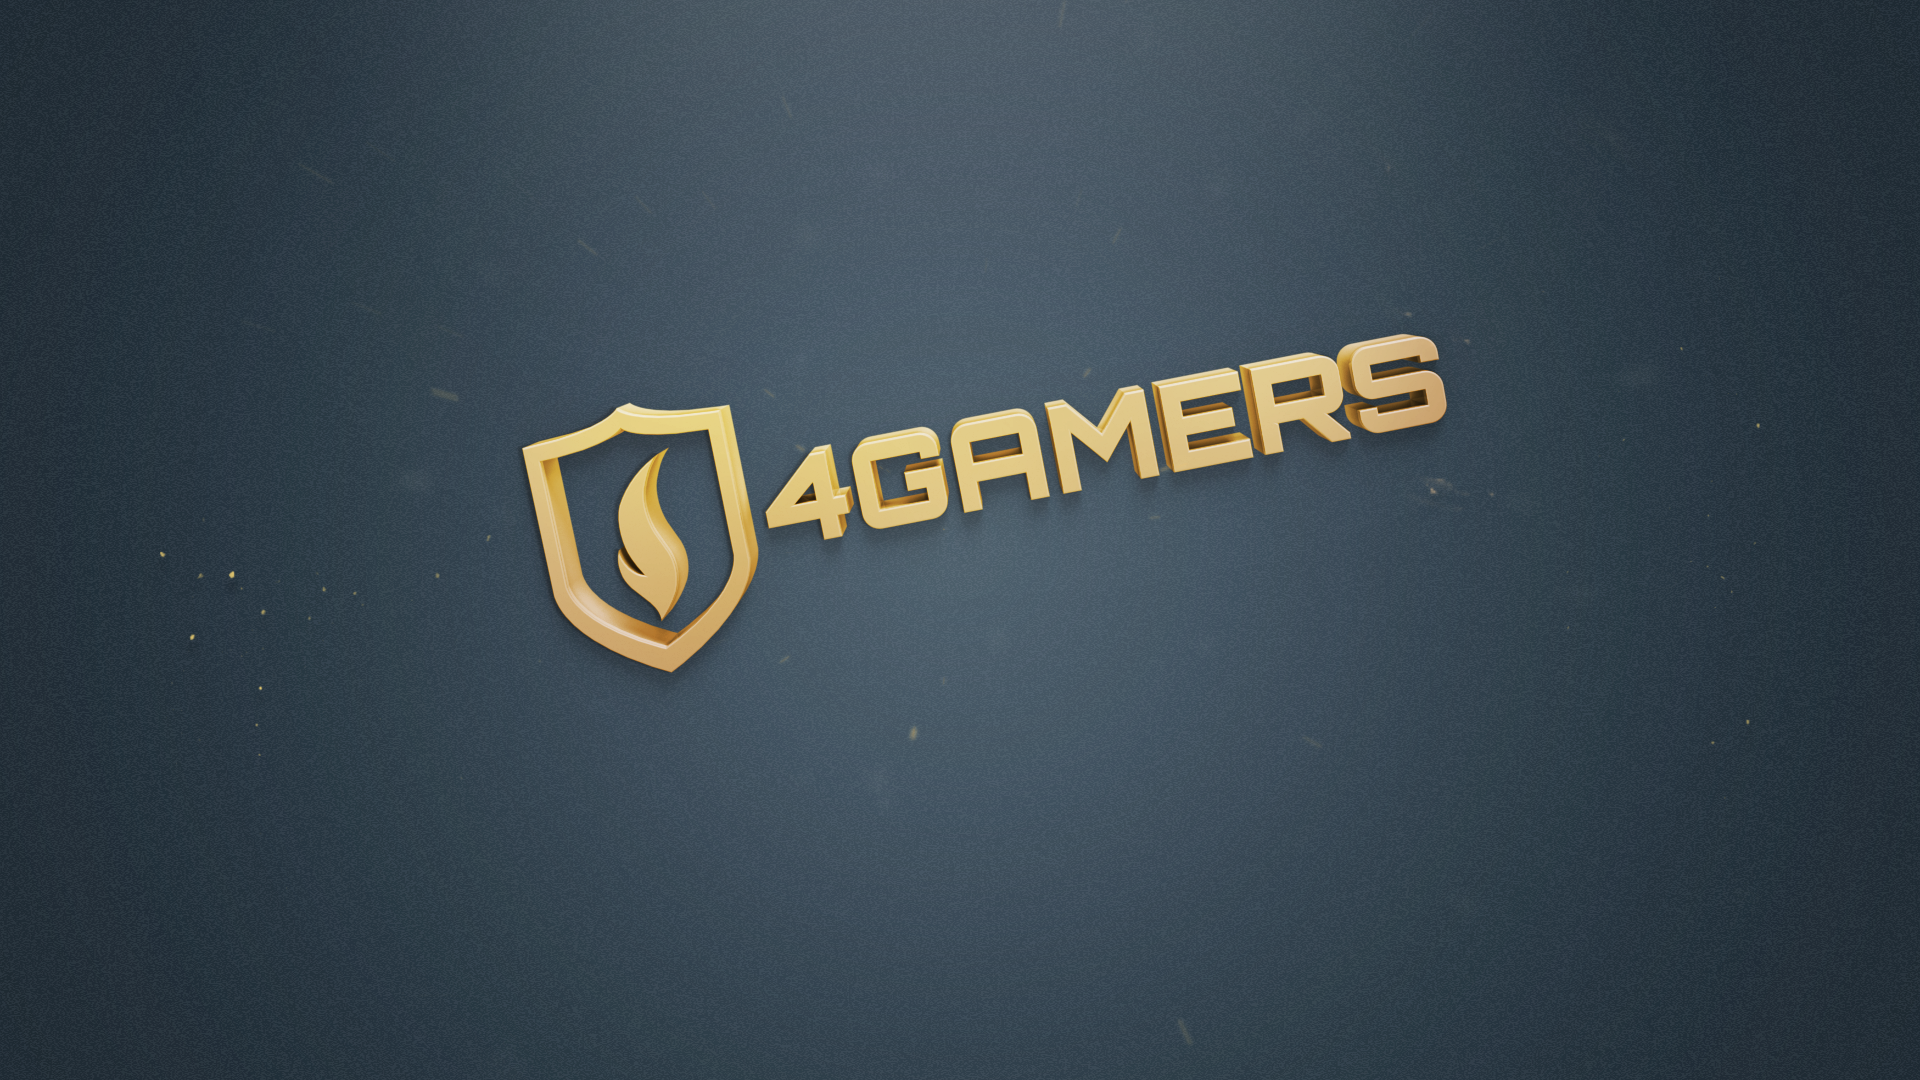 General 1920x1080 4Gamers simple background logo PC gaming typography